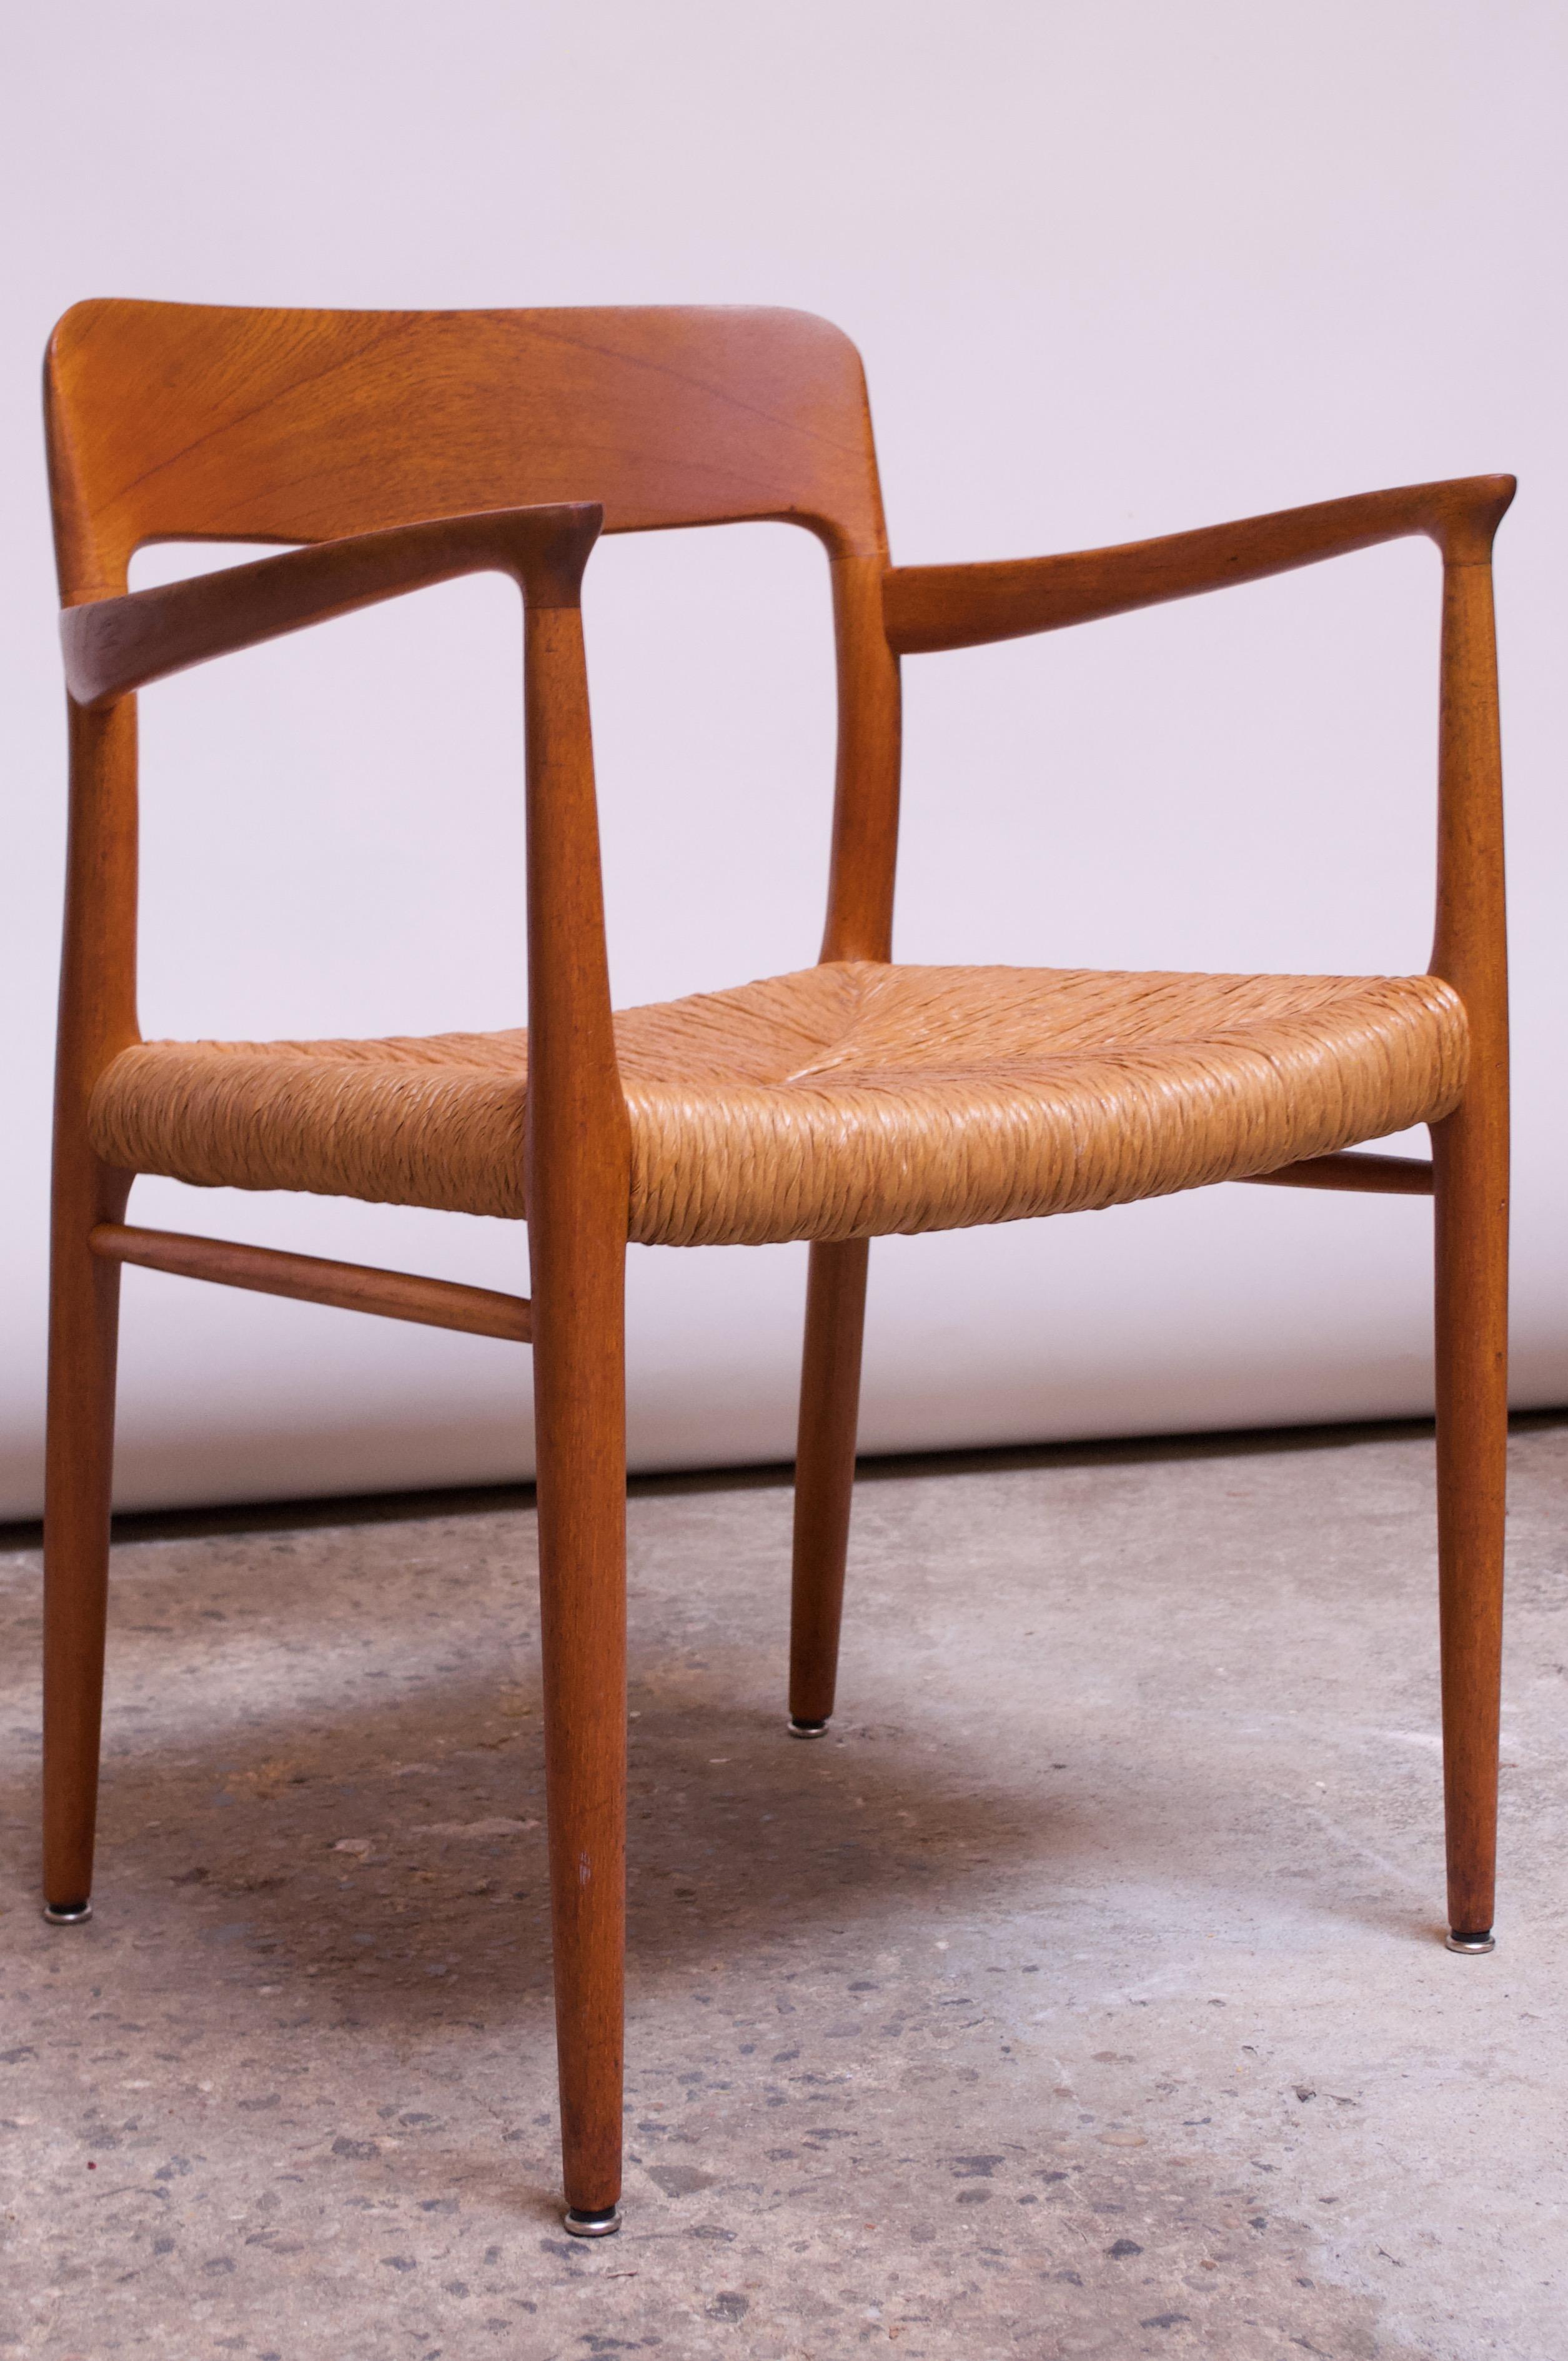 Danish Modern Armchair Model 56 by Niels Møller in Oak and Papercord In Good Condition For Sale In Brooklyn, NY